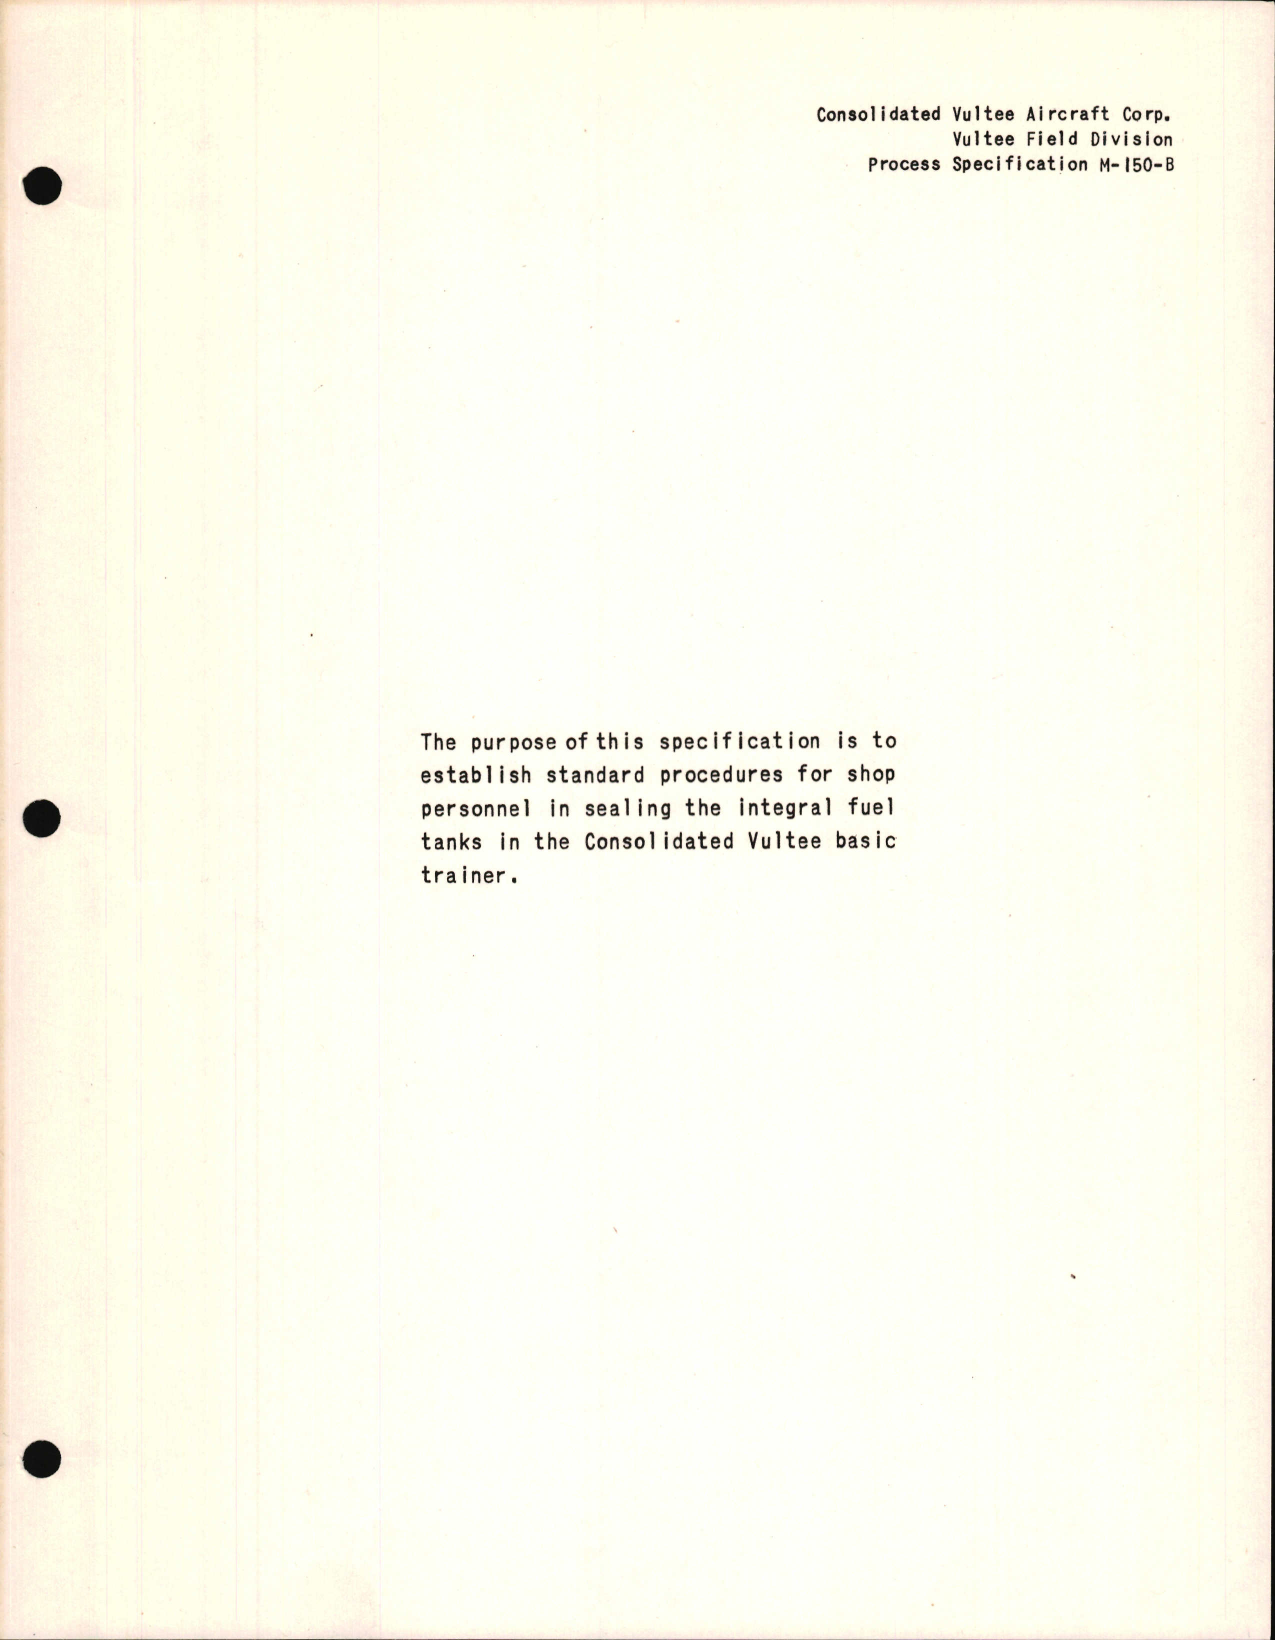 Sample page 5 from AirCorps Library document: Sealing Integral Fuel Tanks